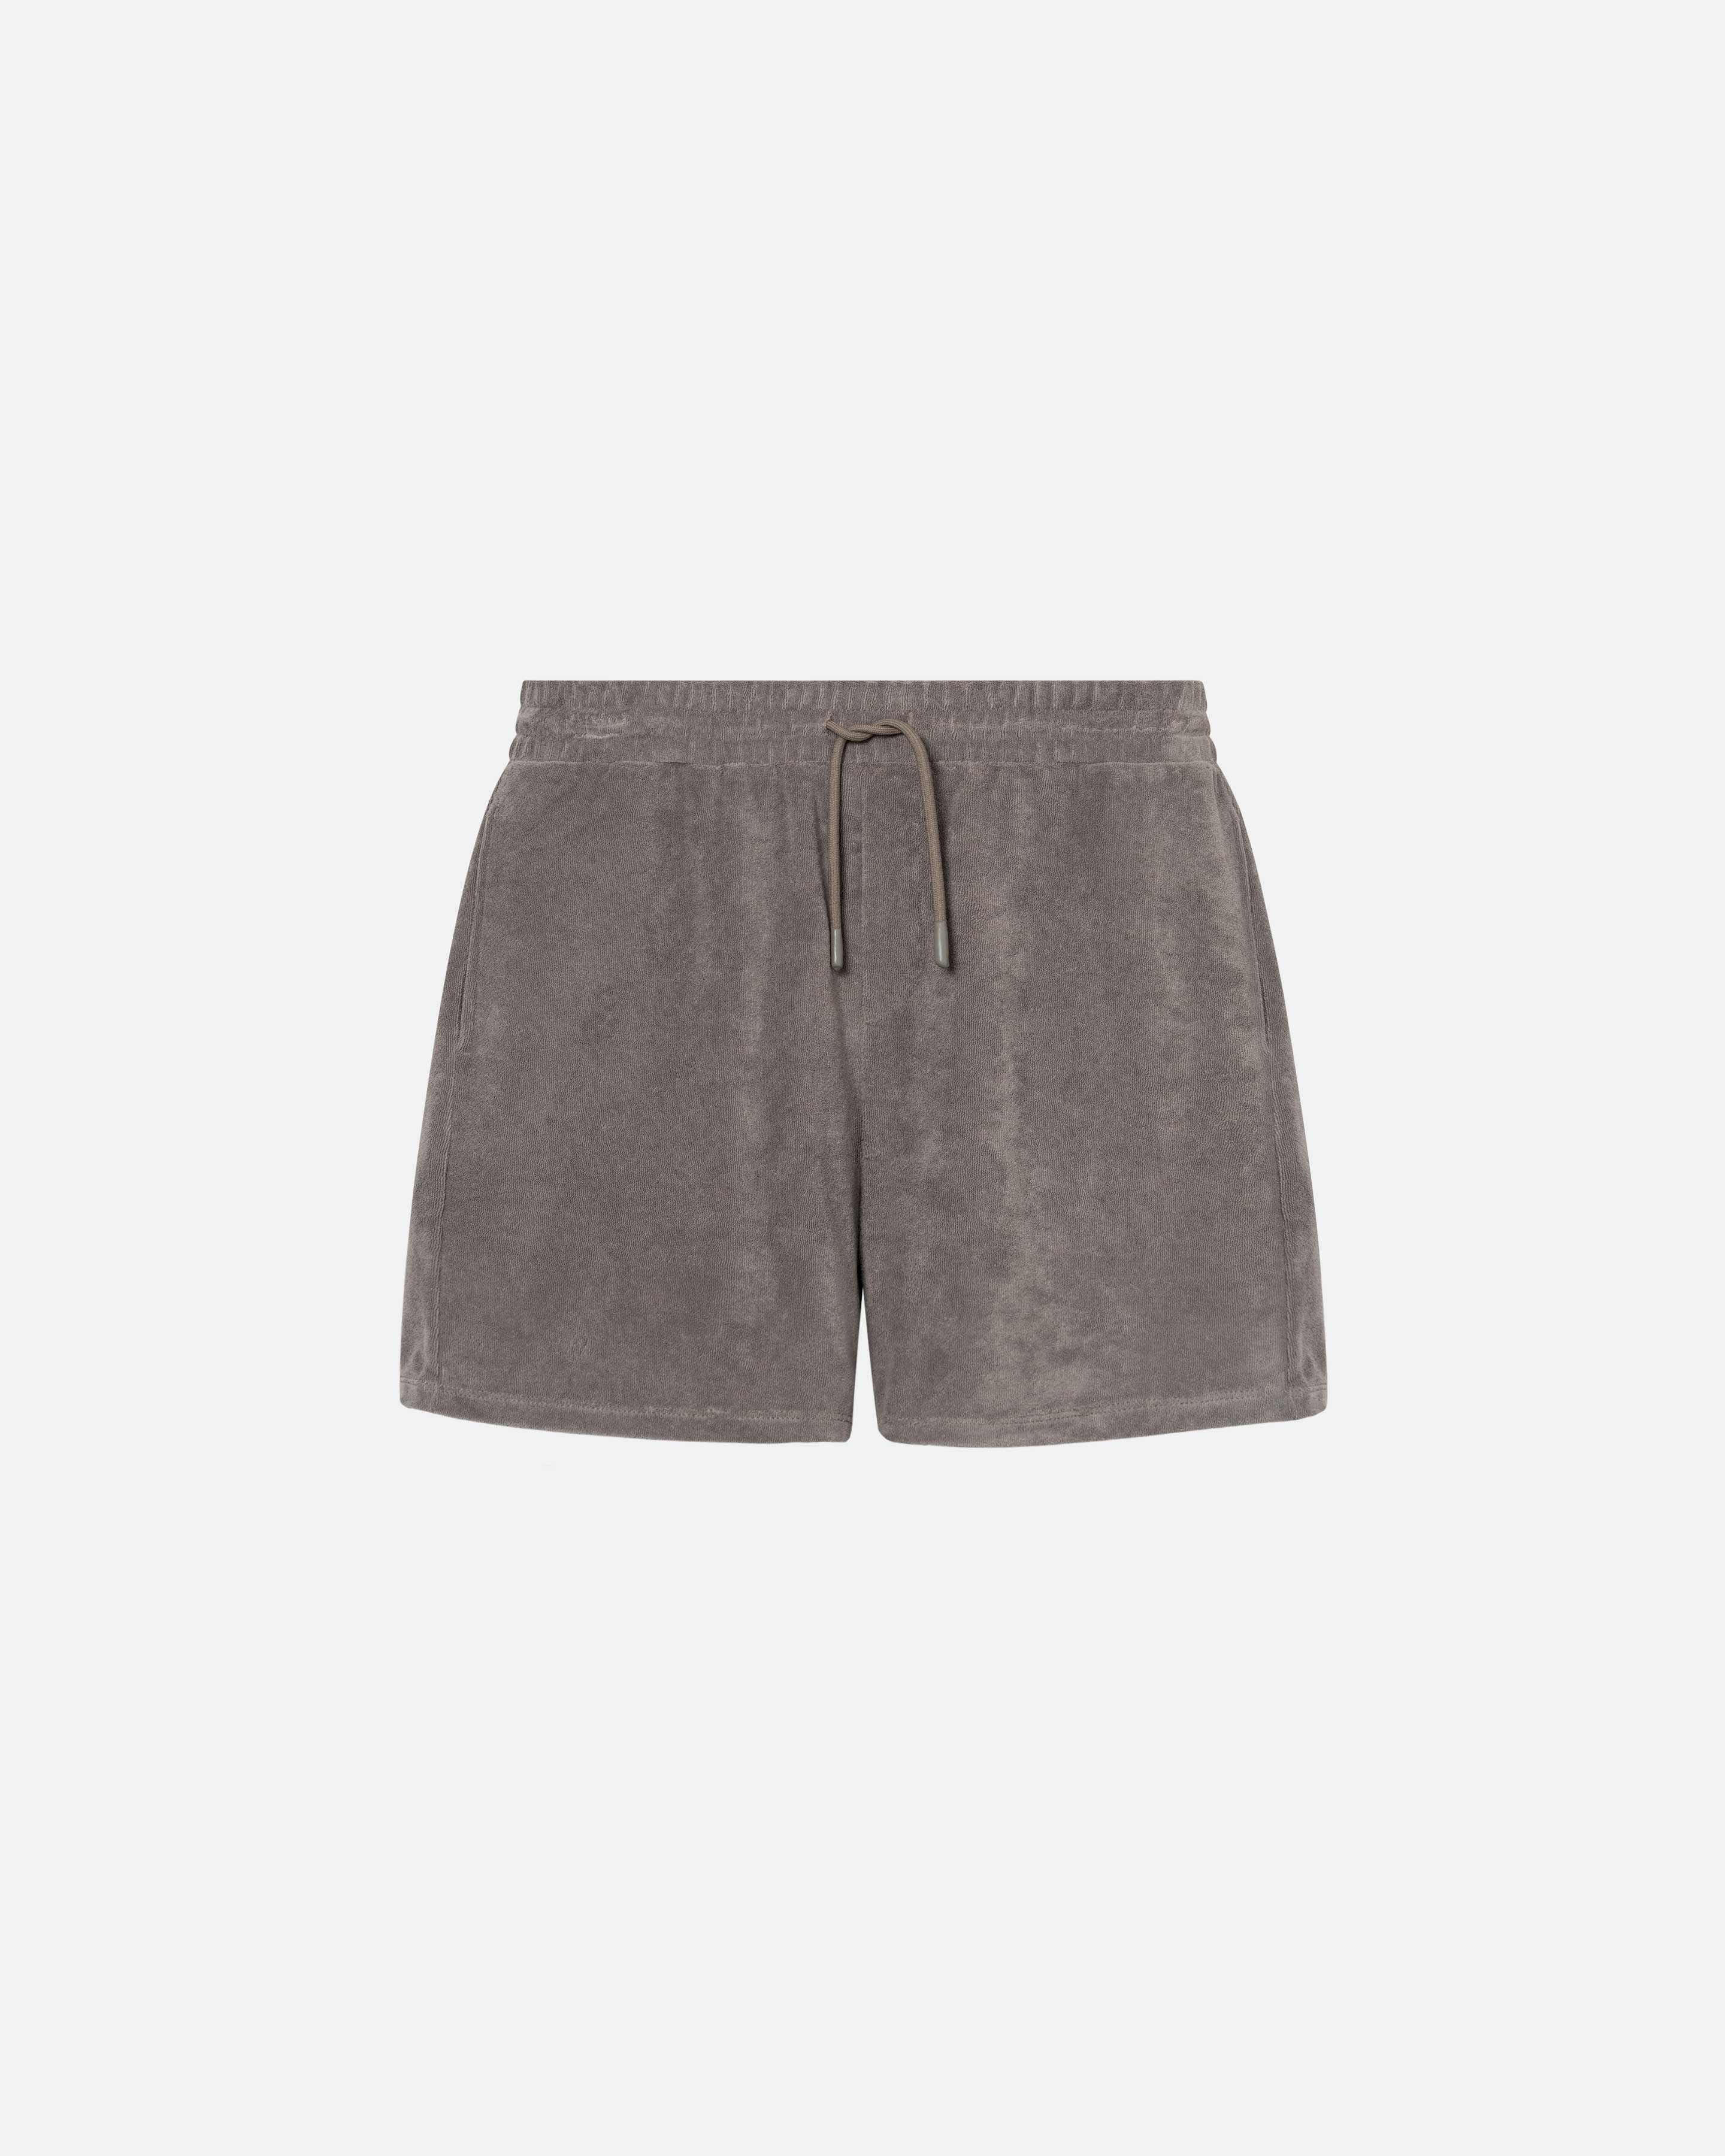 Grey mid length shorts in terry toweling fabric with drawdtring and two side pockets.